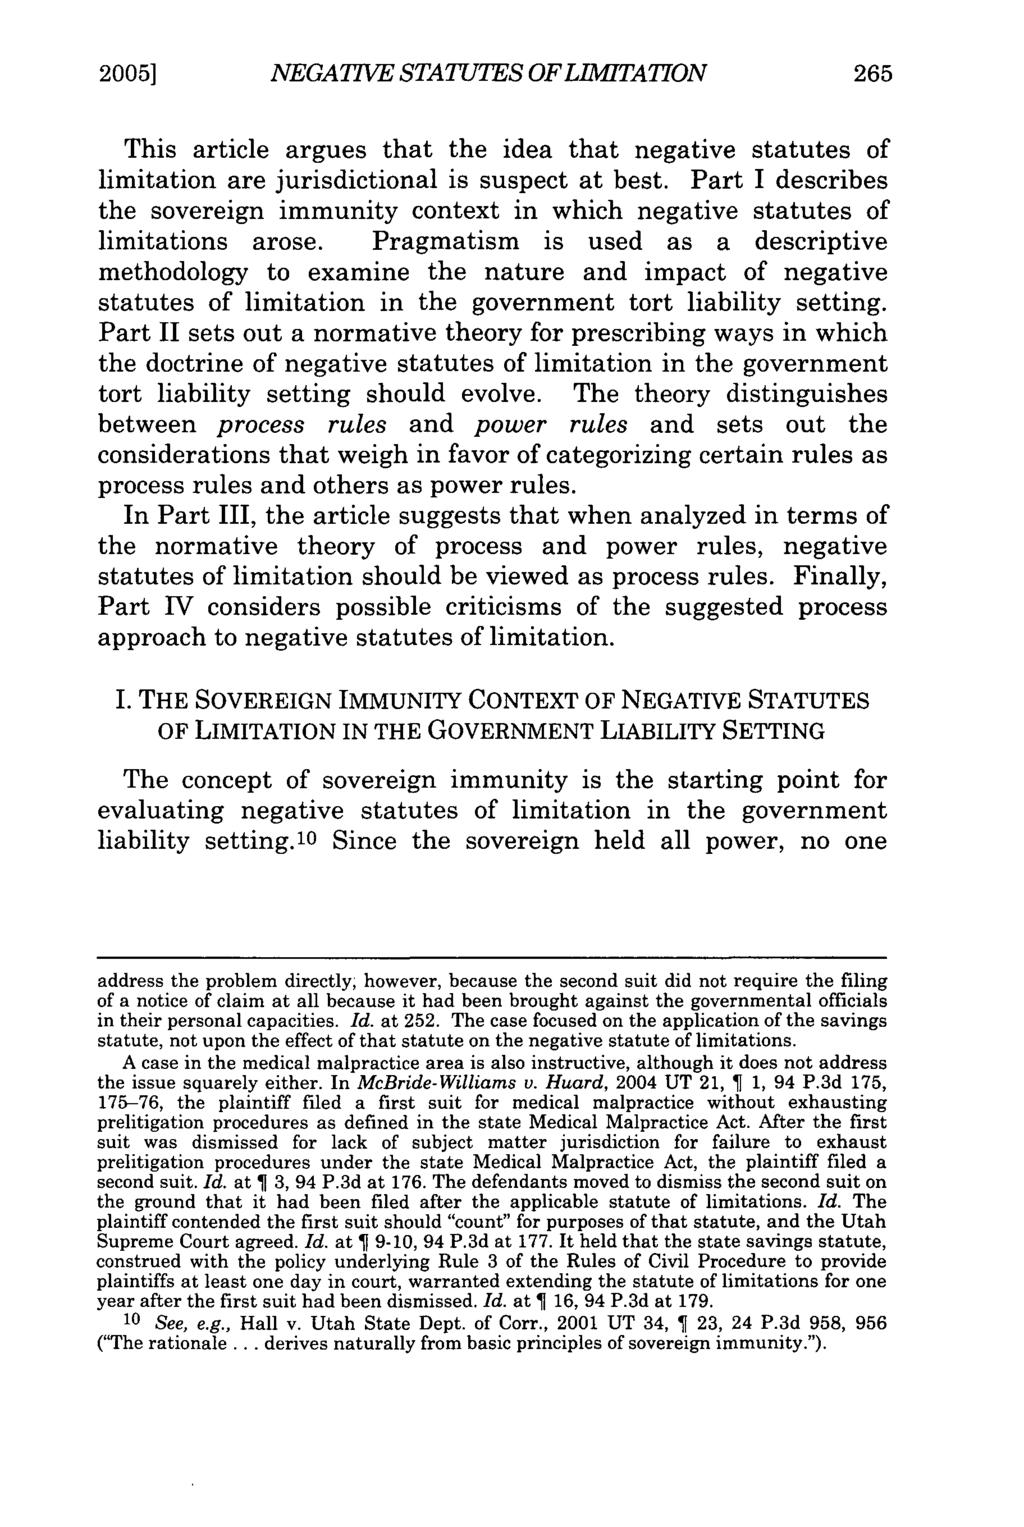 20051 NEGATIVE STATUTES OF LIMITATION This article argues that the idea that negative statutes of limitation are jurisdictional is suspect at best.